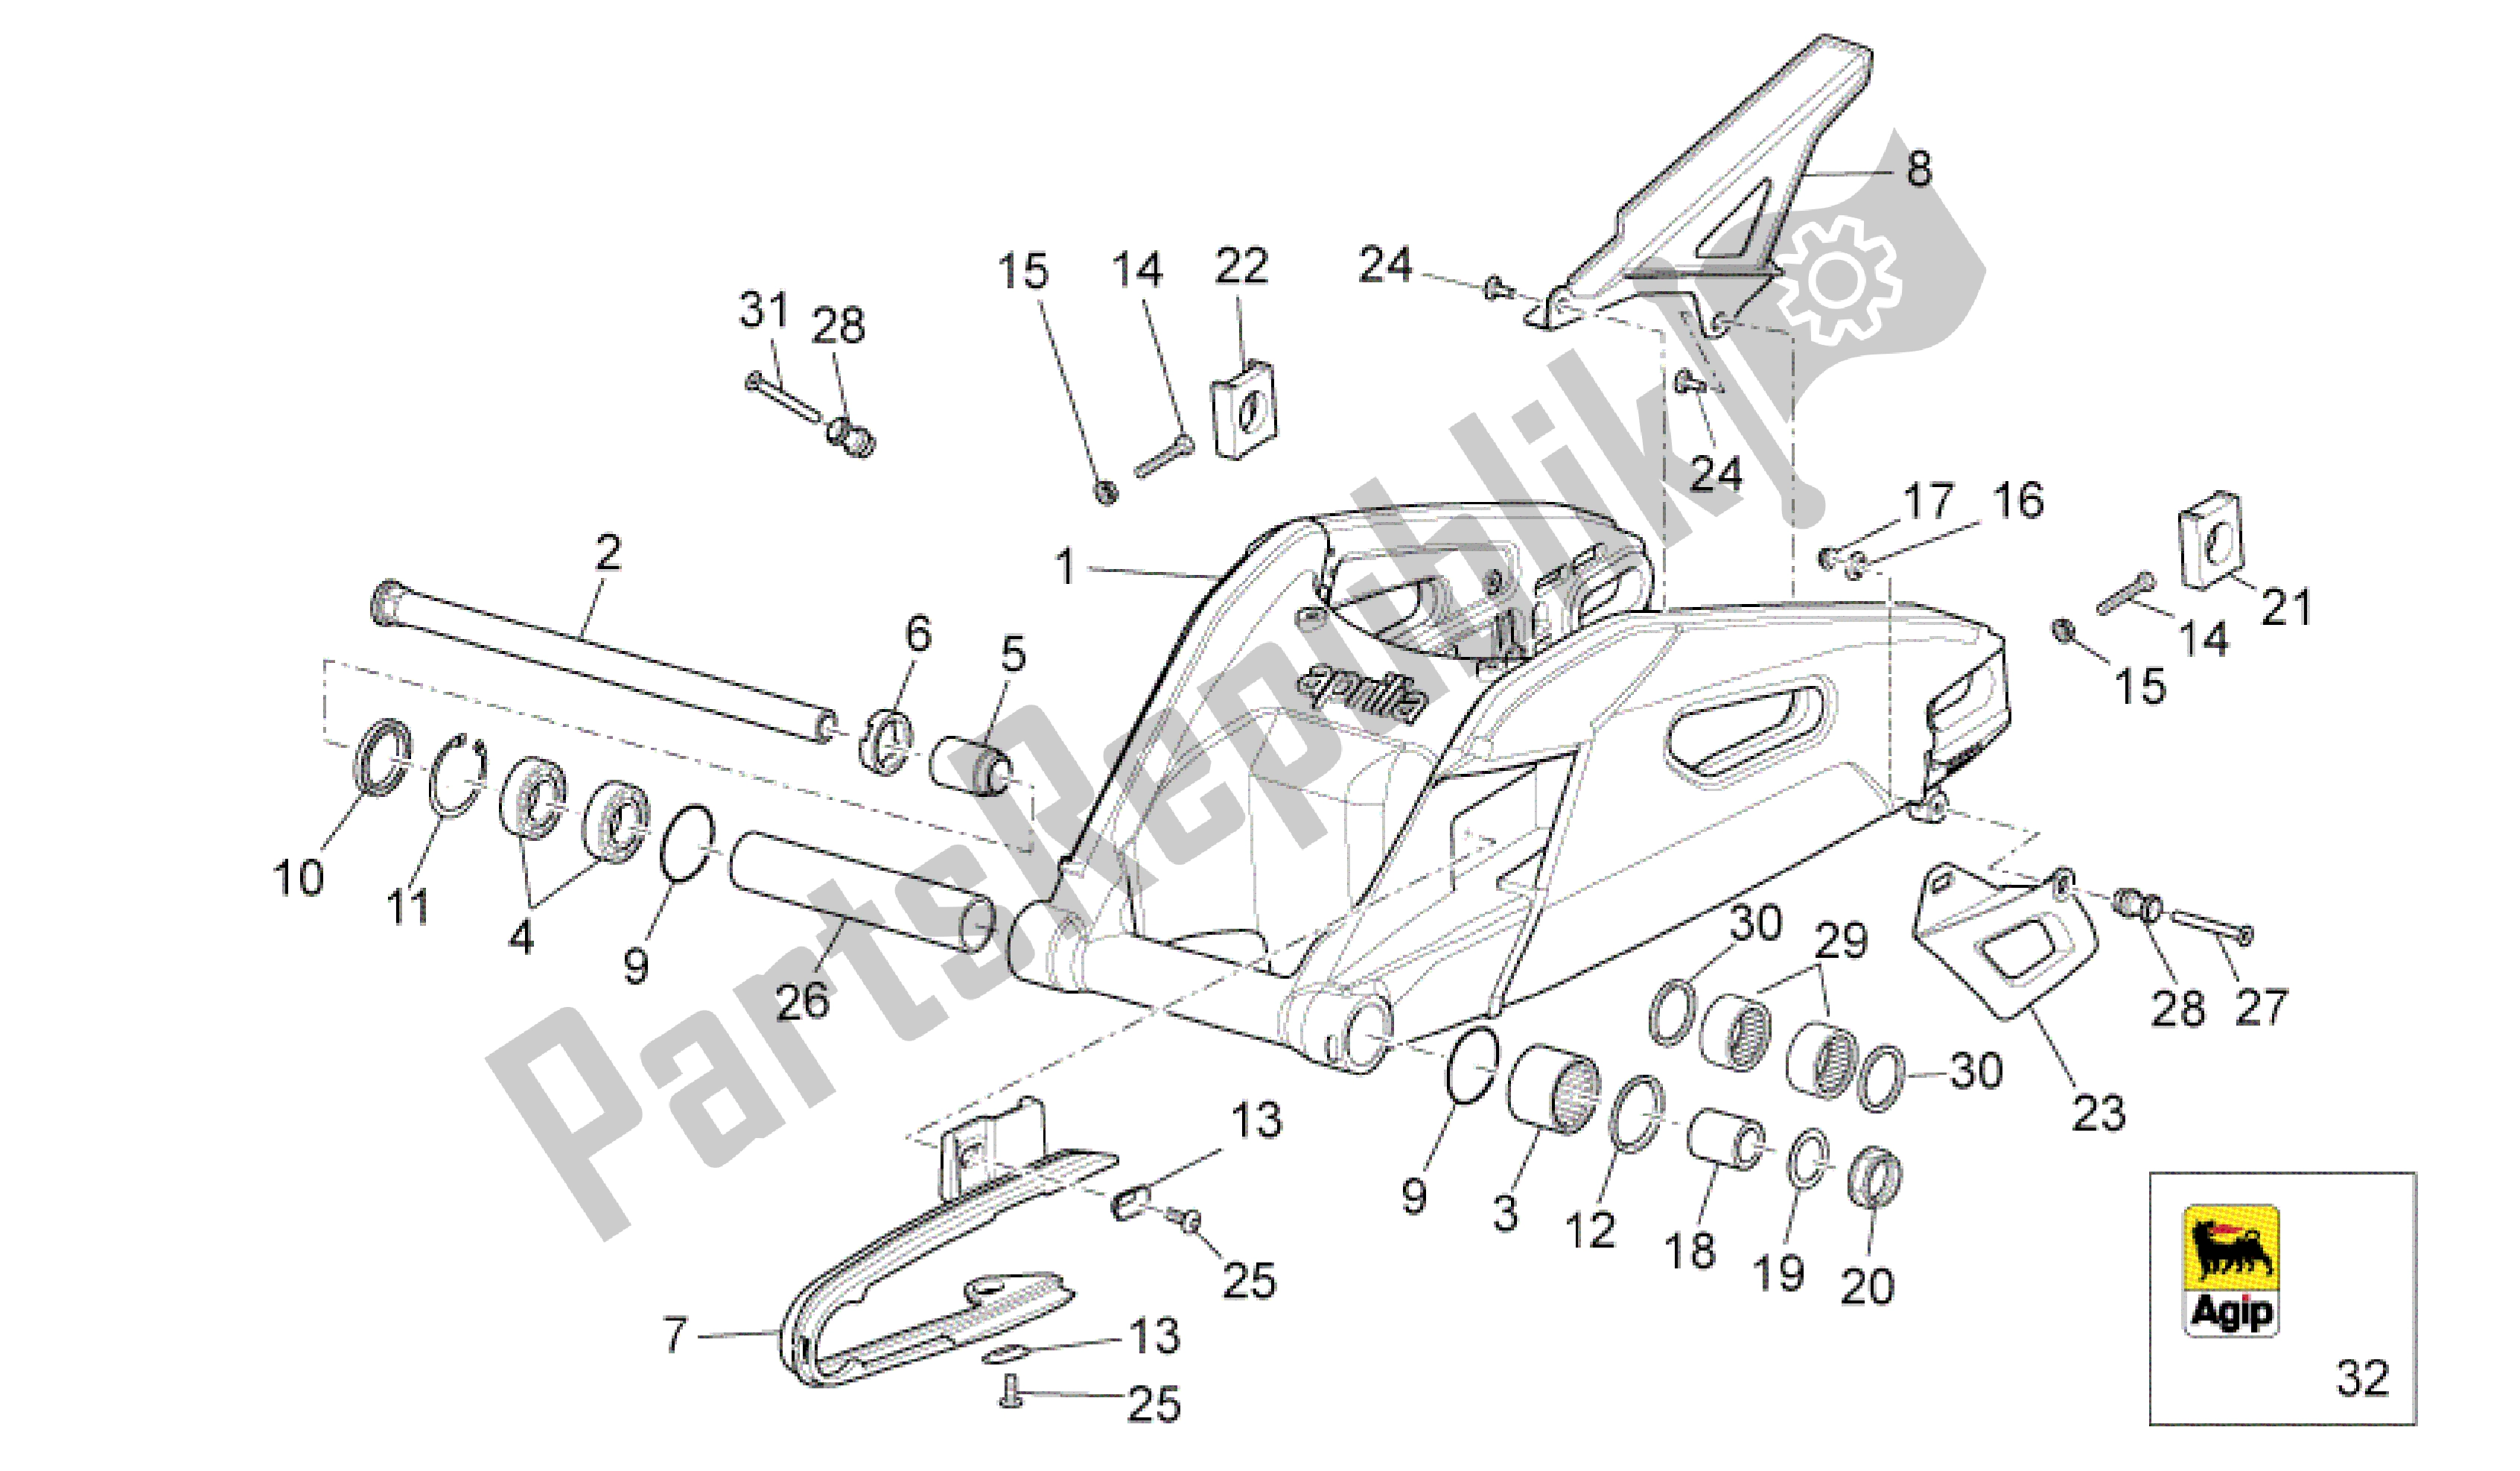 All parts for the Swing Arm of the Aprilia RSV4 Aprc R ABS 3984 1000 2013